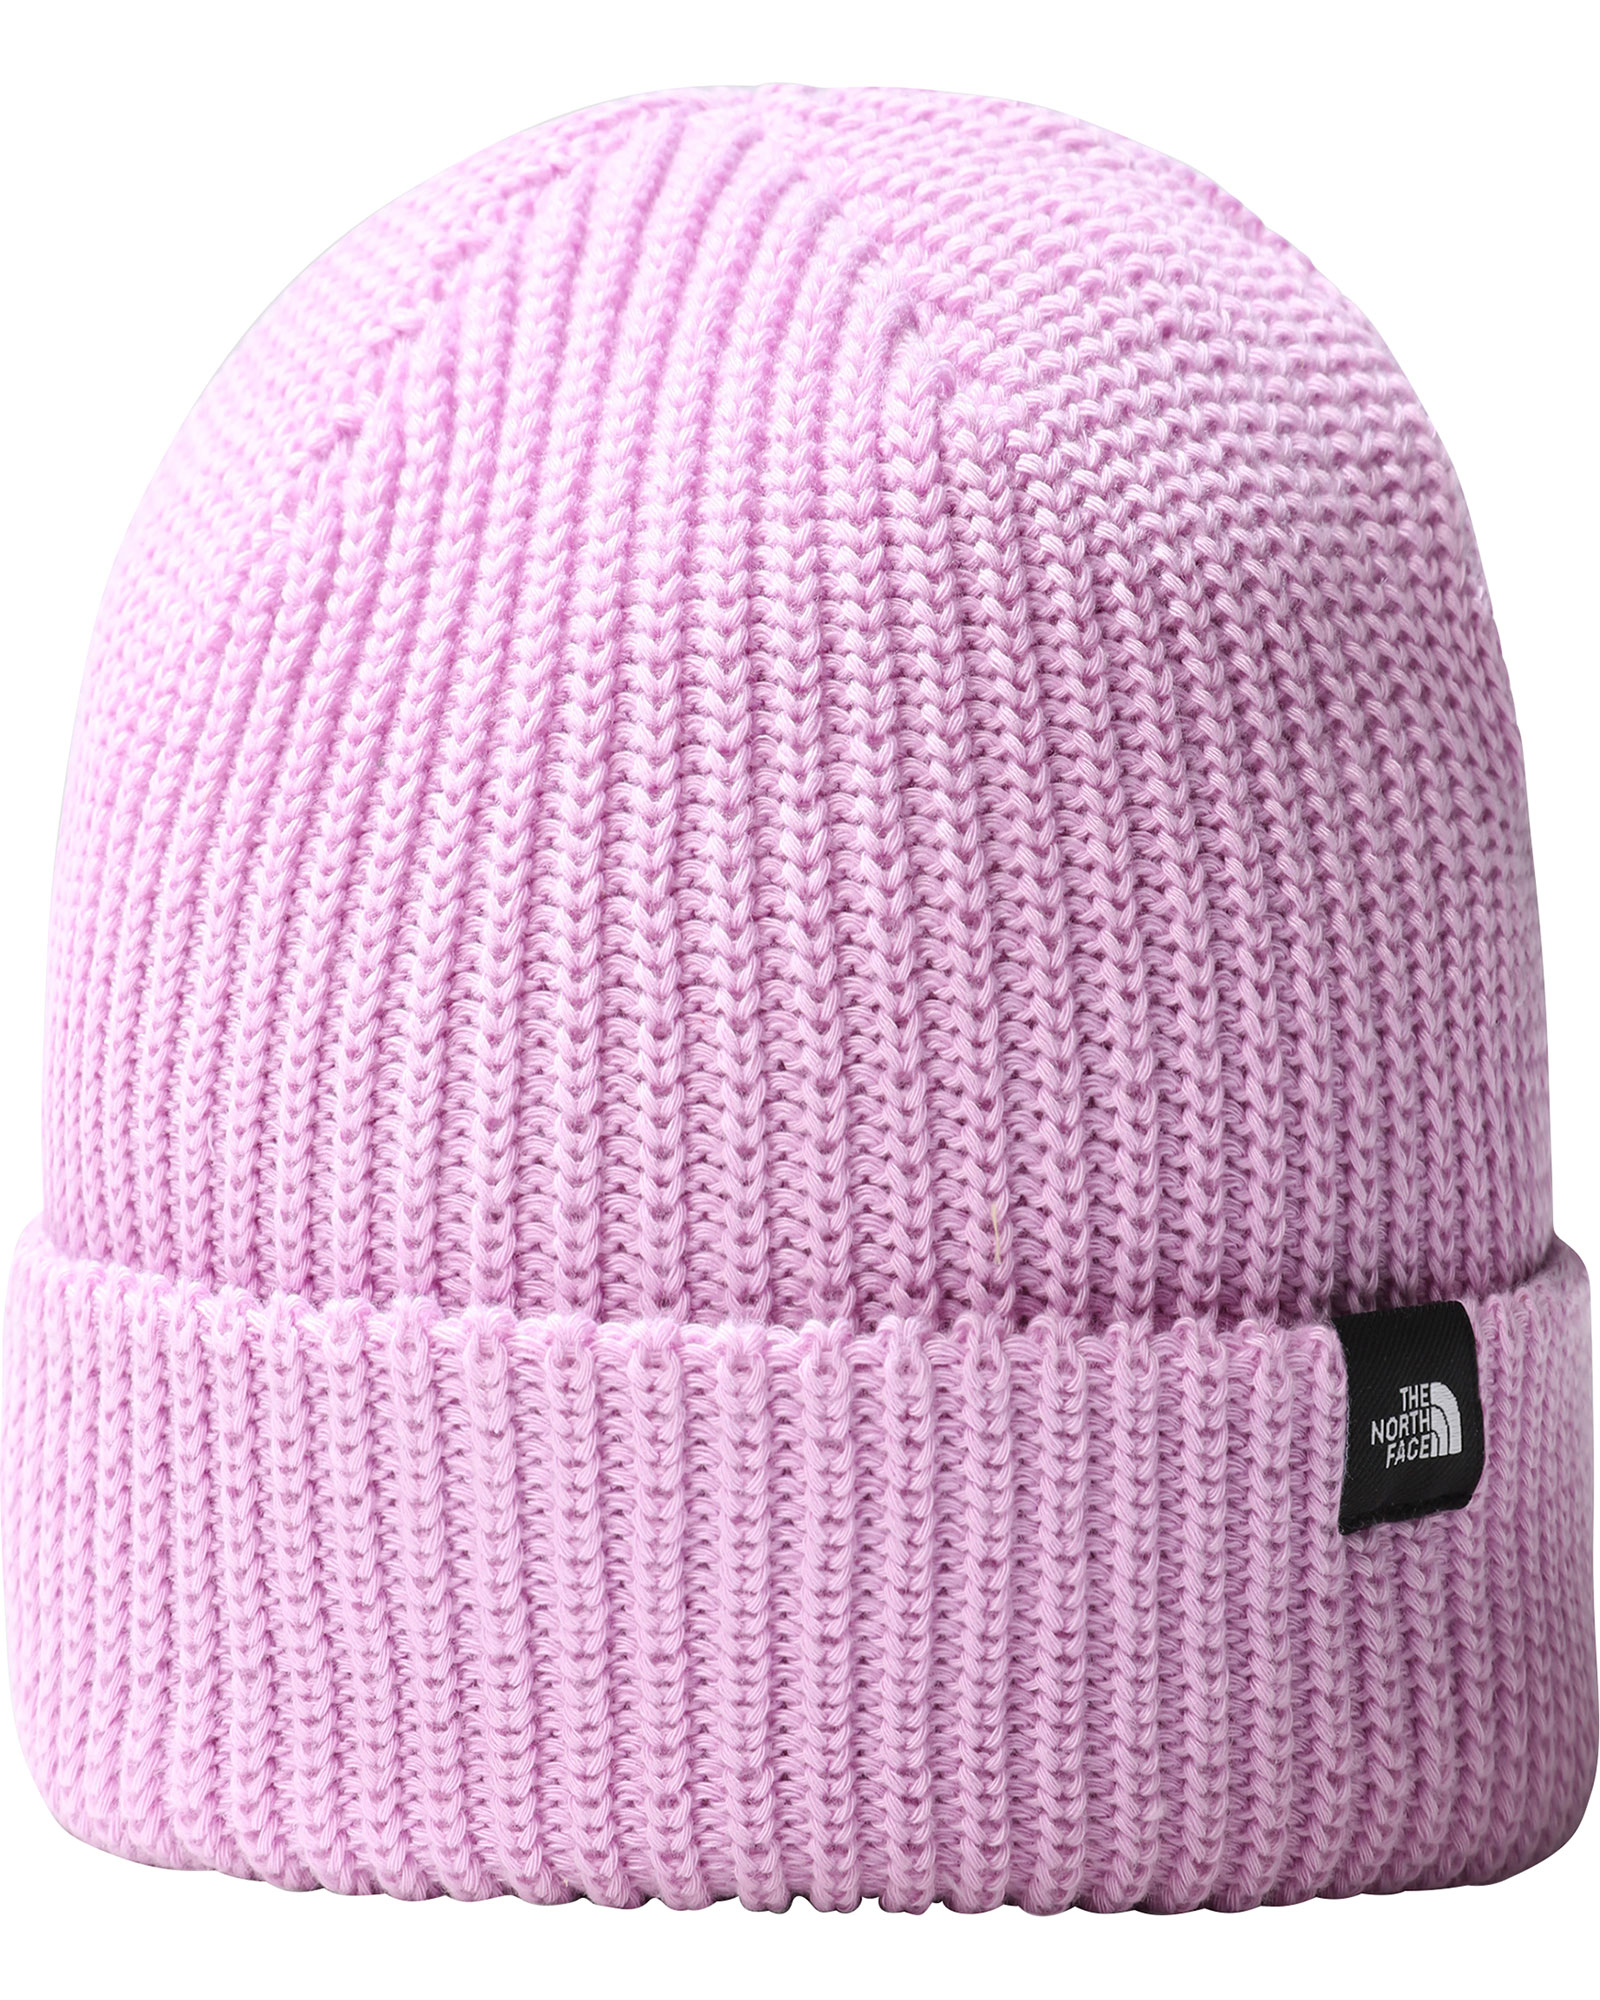 The North Face TNF Fishermans Beanie - Lupine